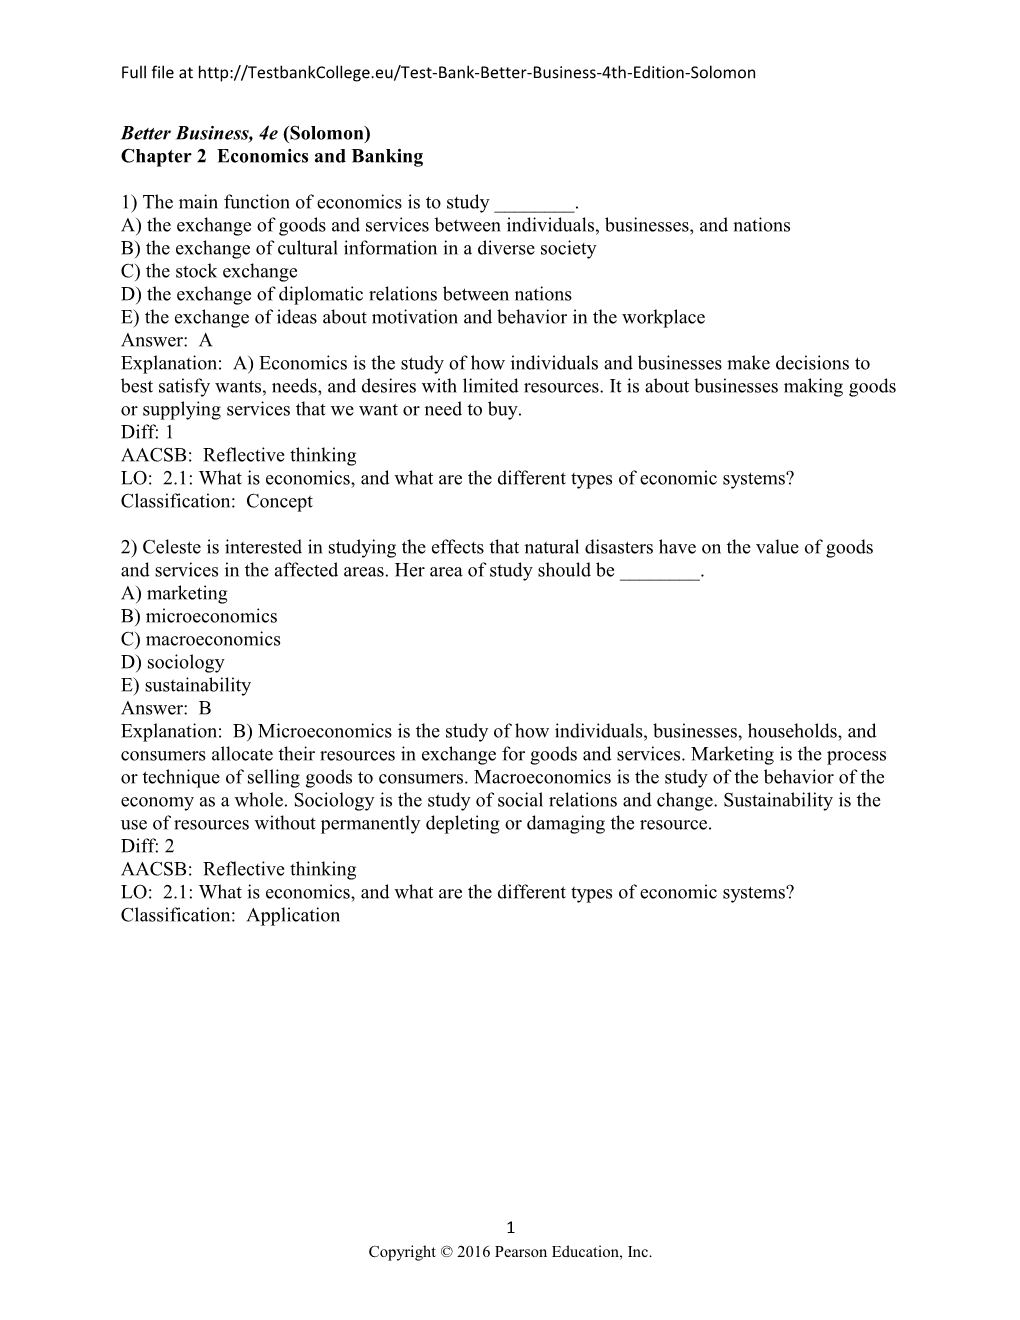 Chapter 2 Economics and Banking